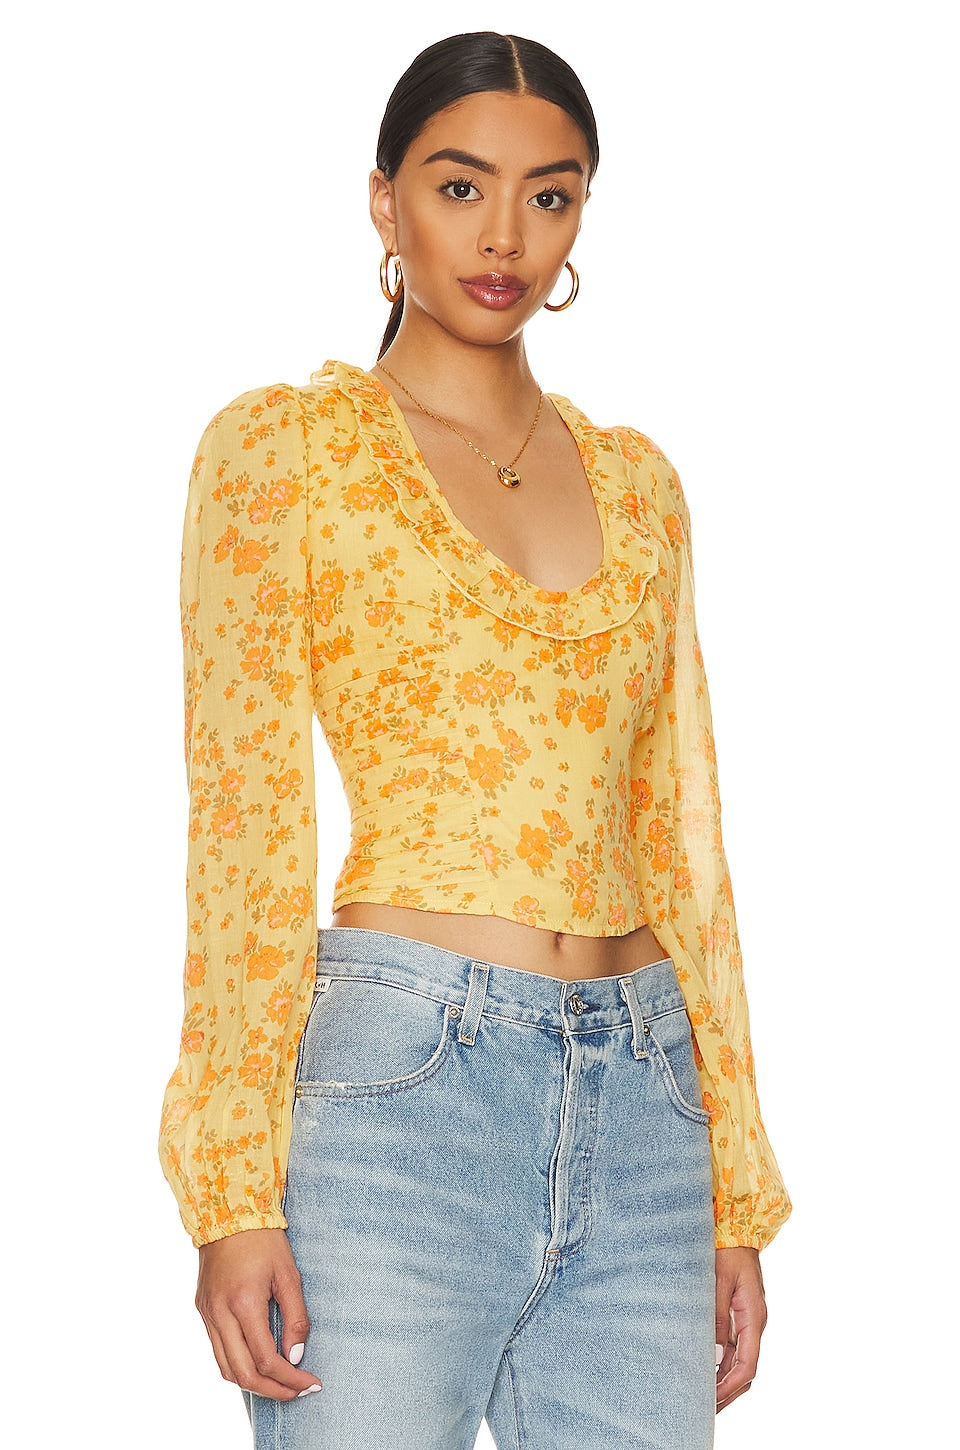 Free People Another Life Top in Honey Combo Size X-Small